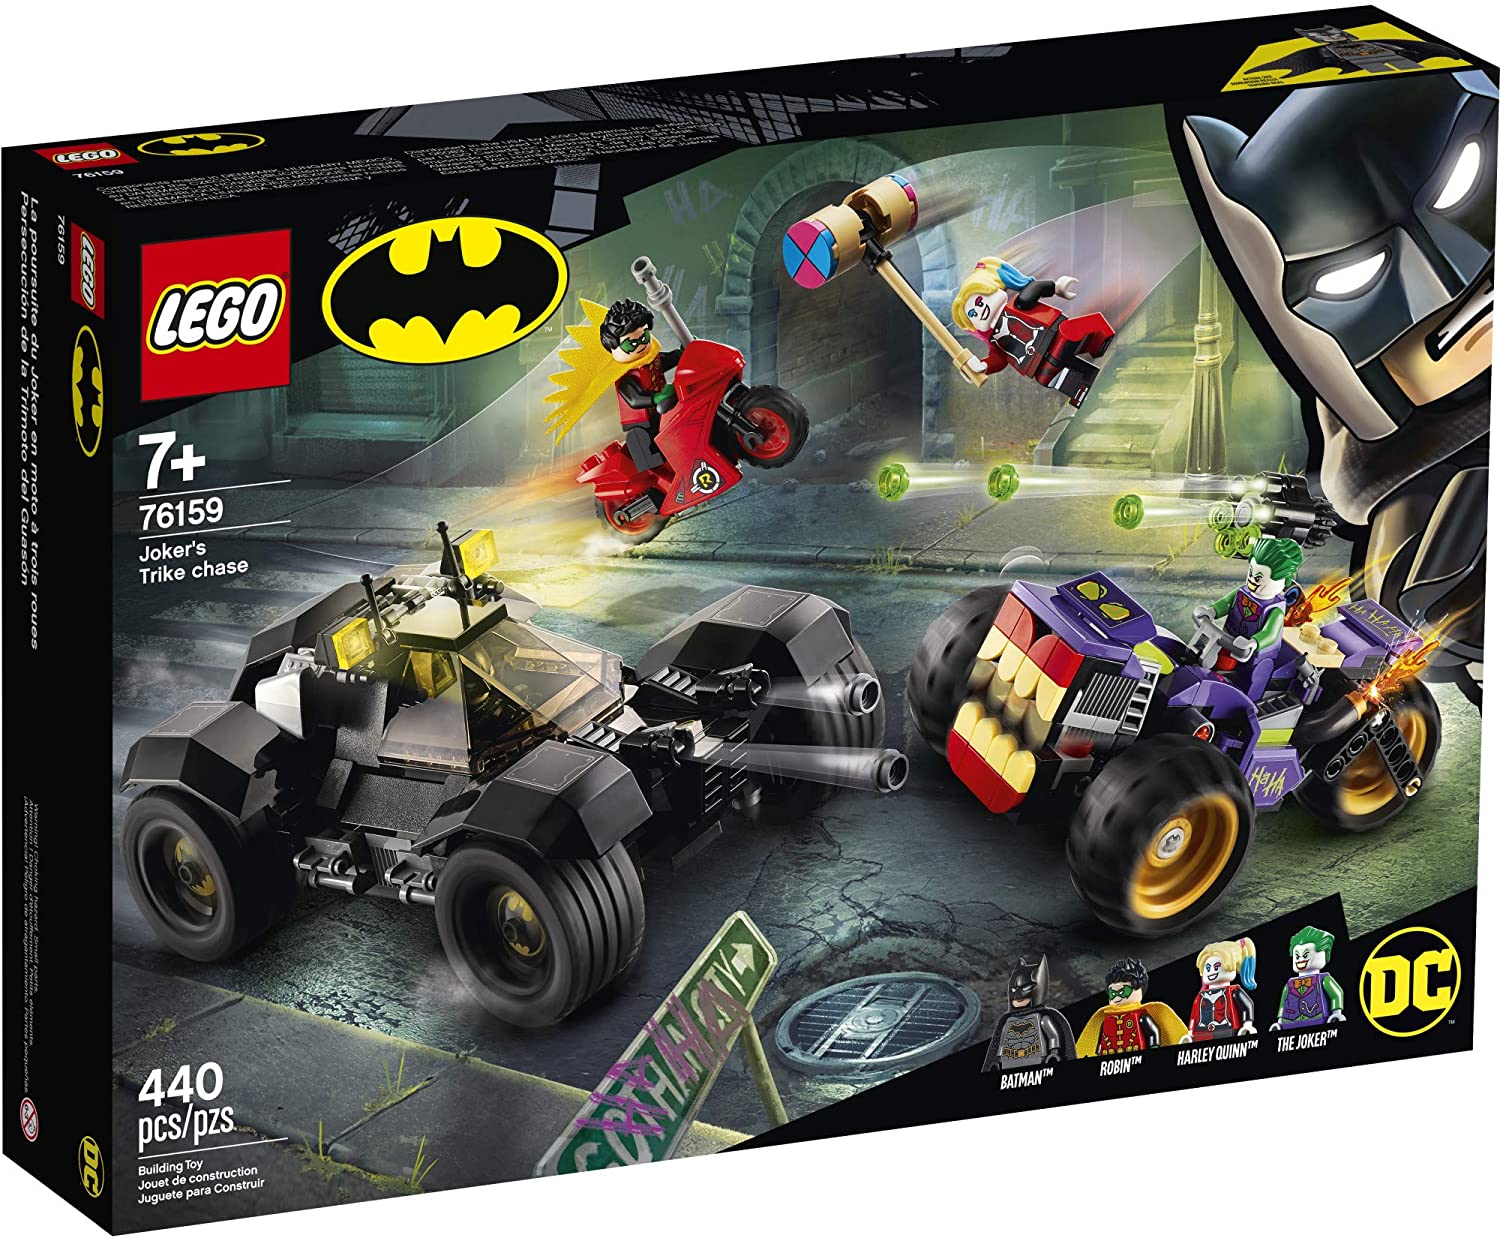 From Denmark】LEGO DC Batman Clown Tricycle Chasing 76159 Superhero Car and  Motorcycle Toy Set, Mini Shooting Batmobile Toy, Suit for Batman, Robin,  Joker and Harley Quinn Fans (440pcs) Genuine Guarantee From Denmark |